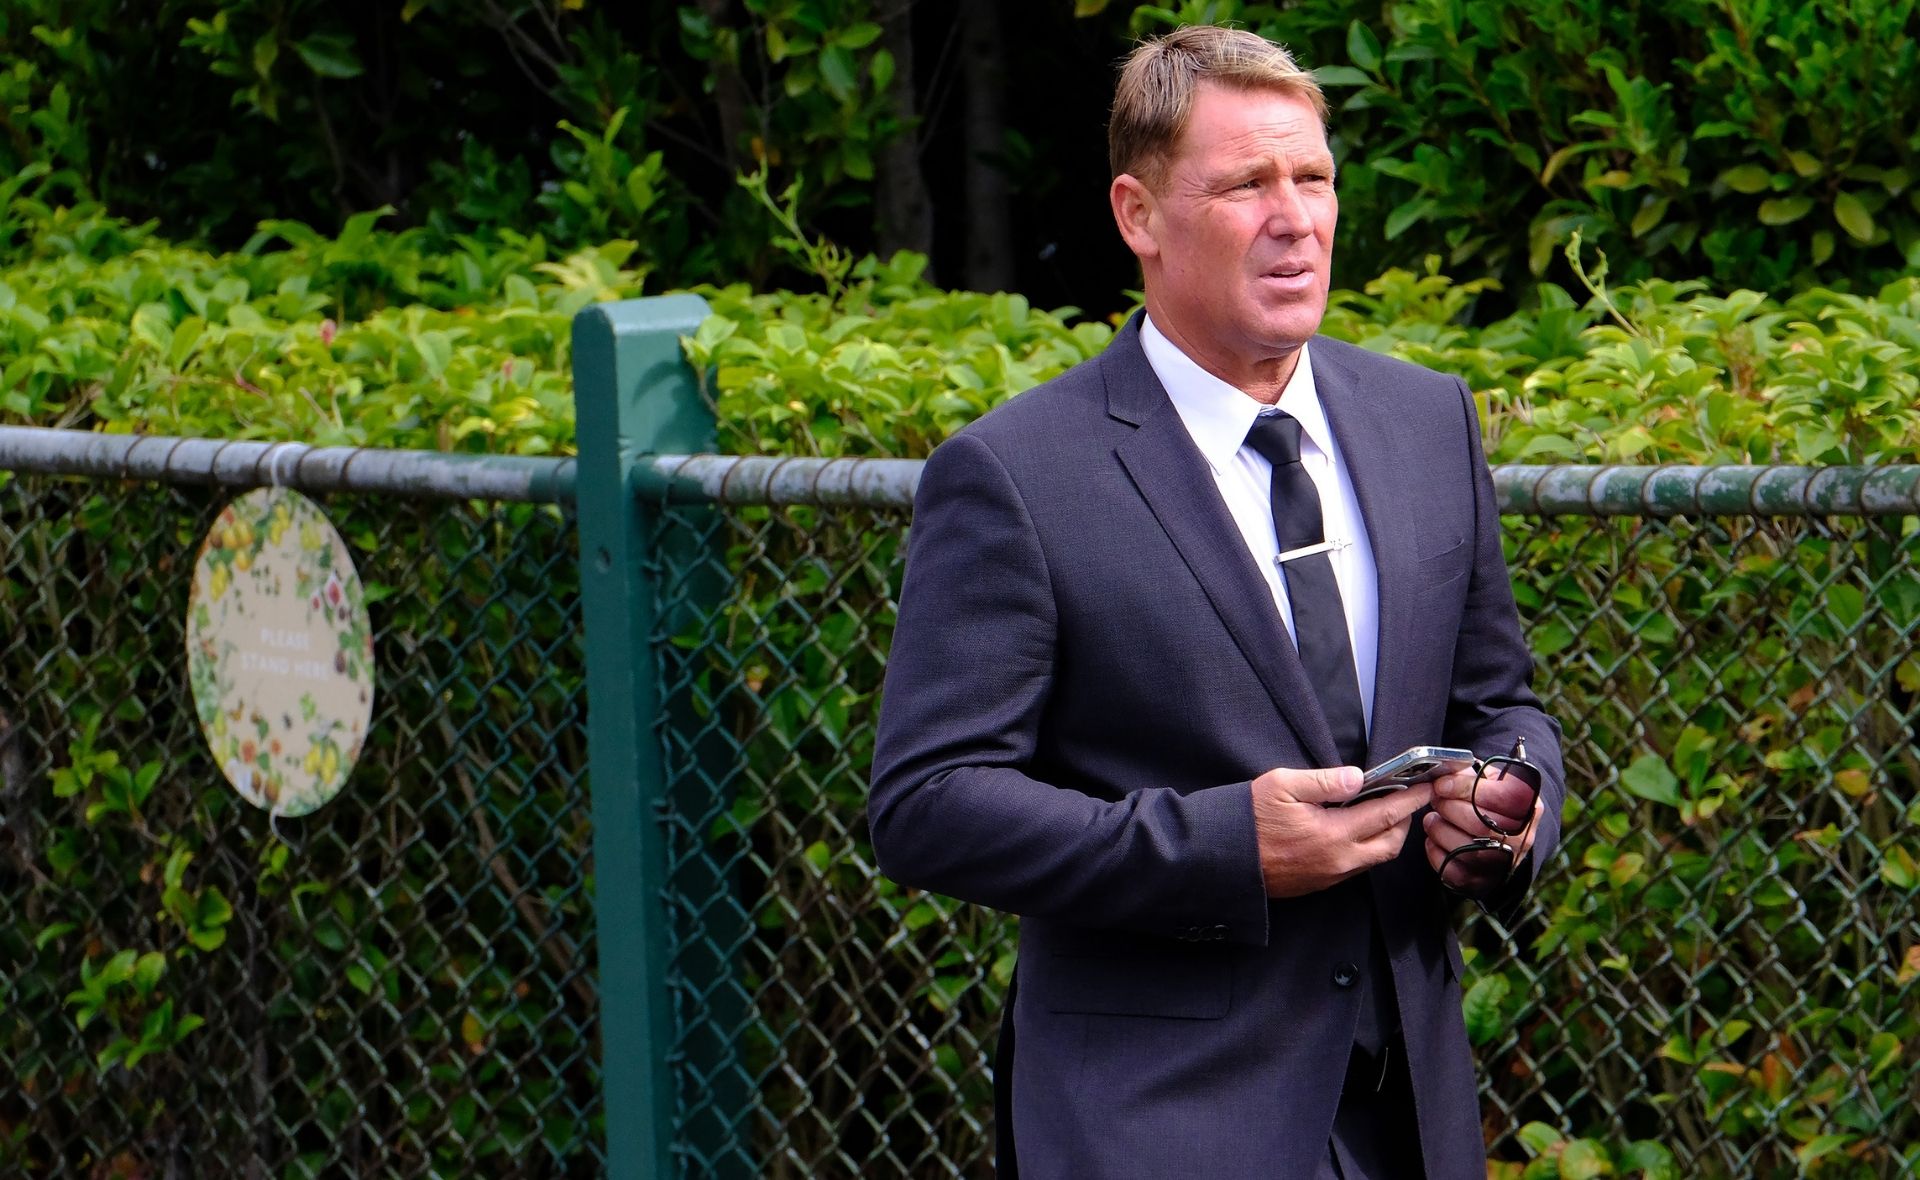 Shane Warne is laid to rest surrounded by family and friends during a private funeral in Melbourne